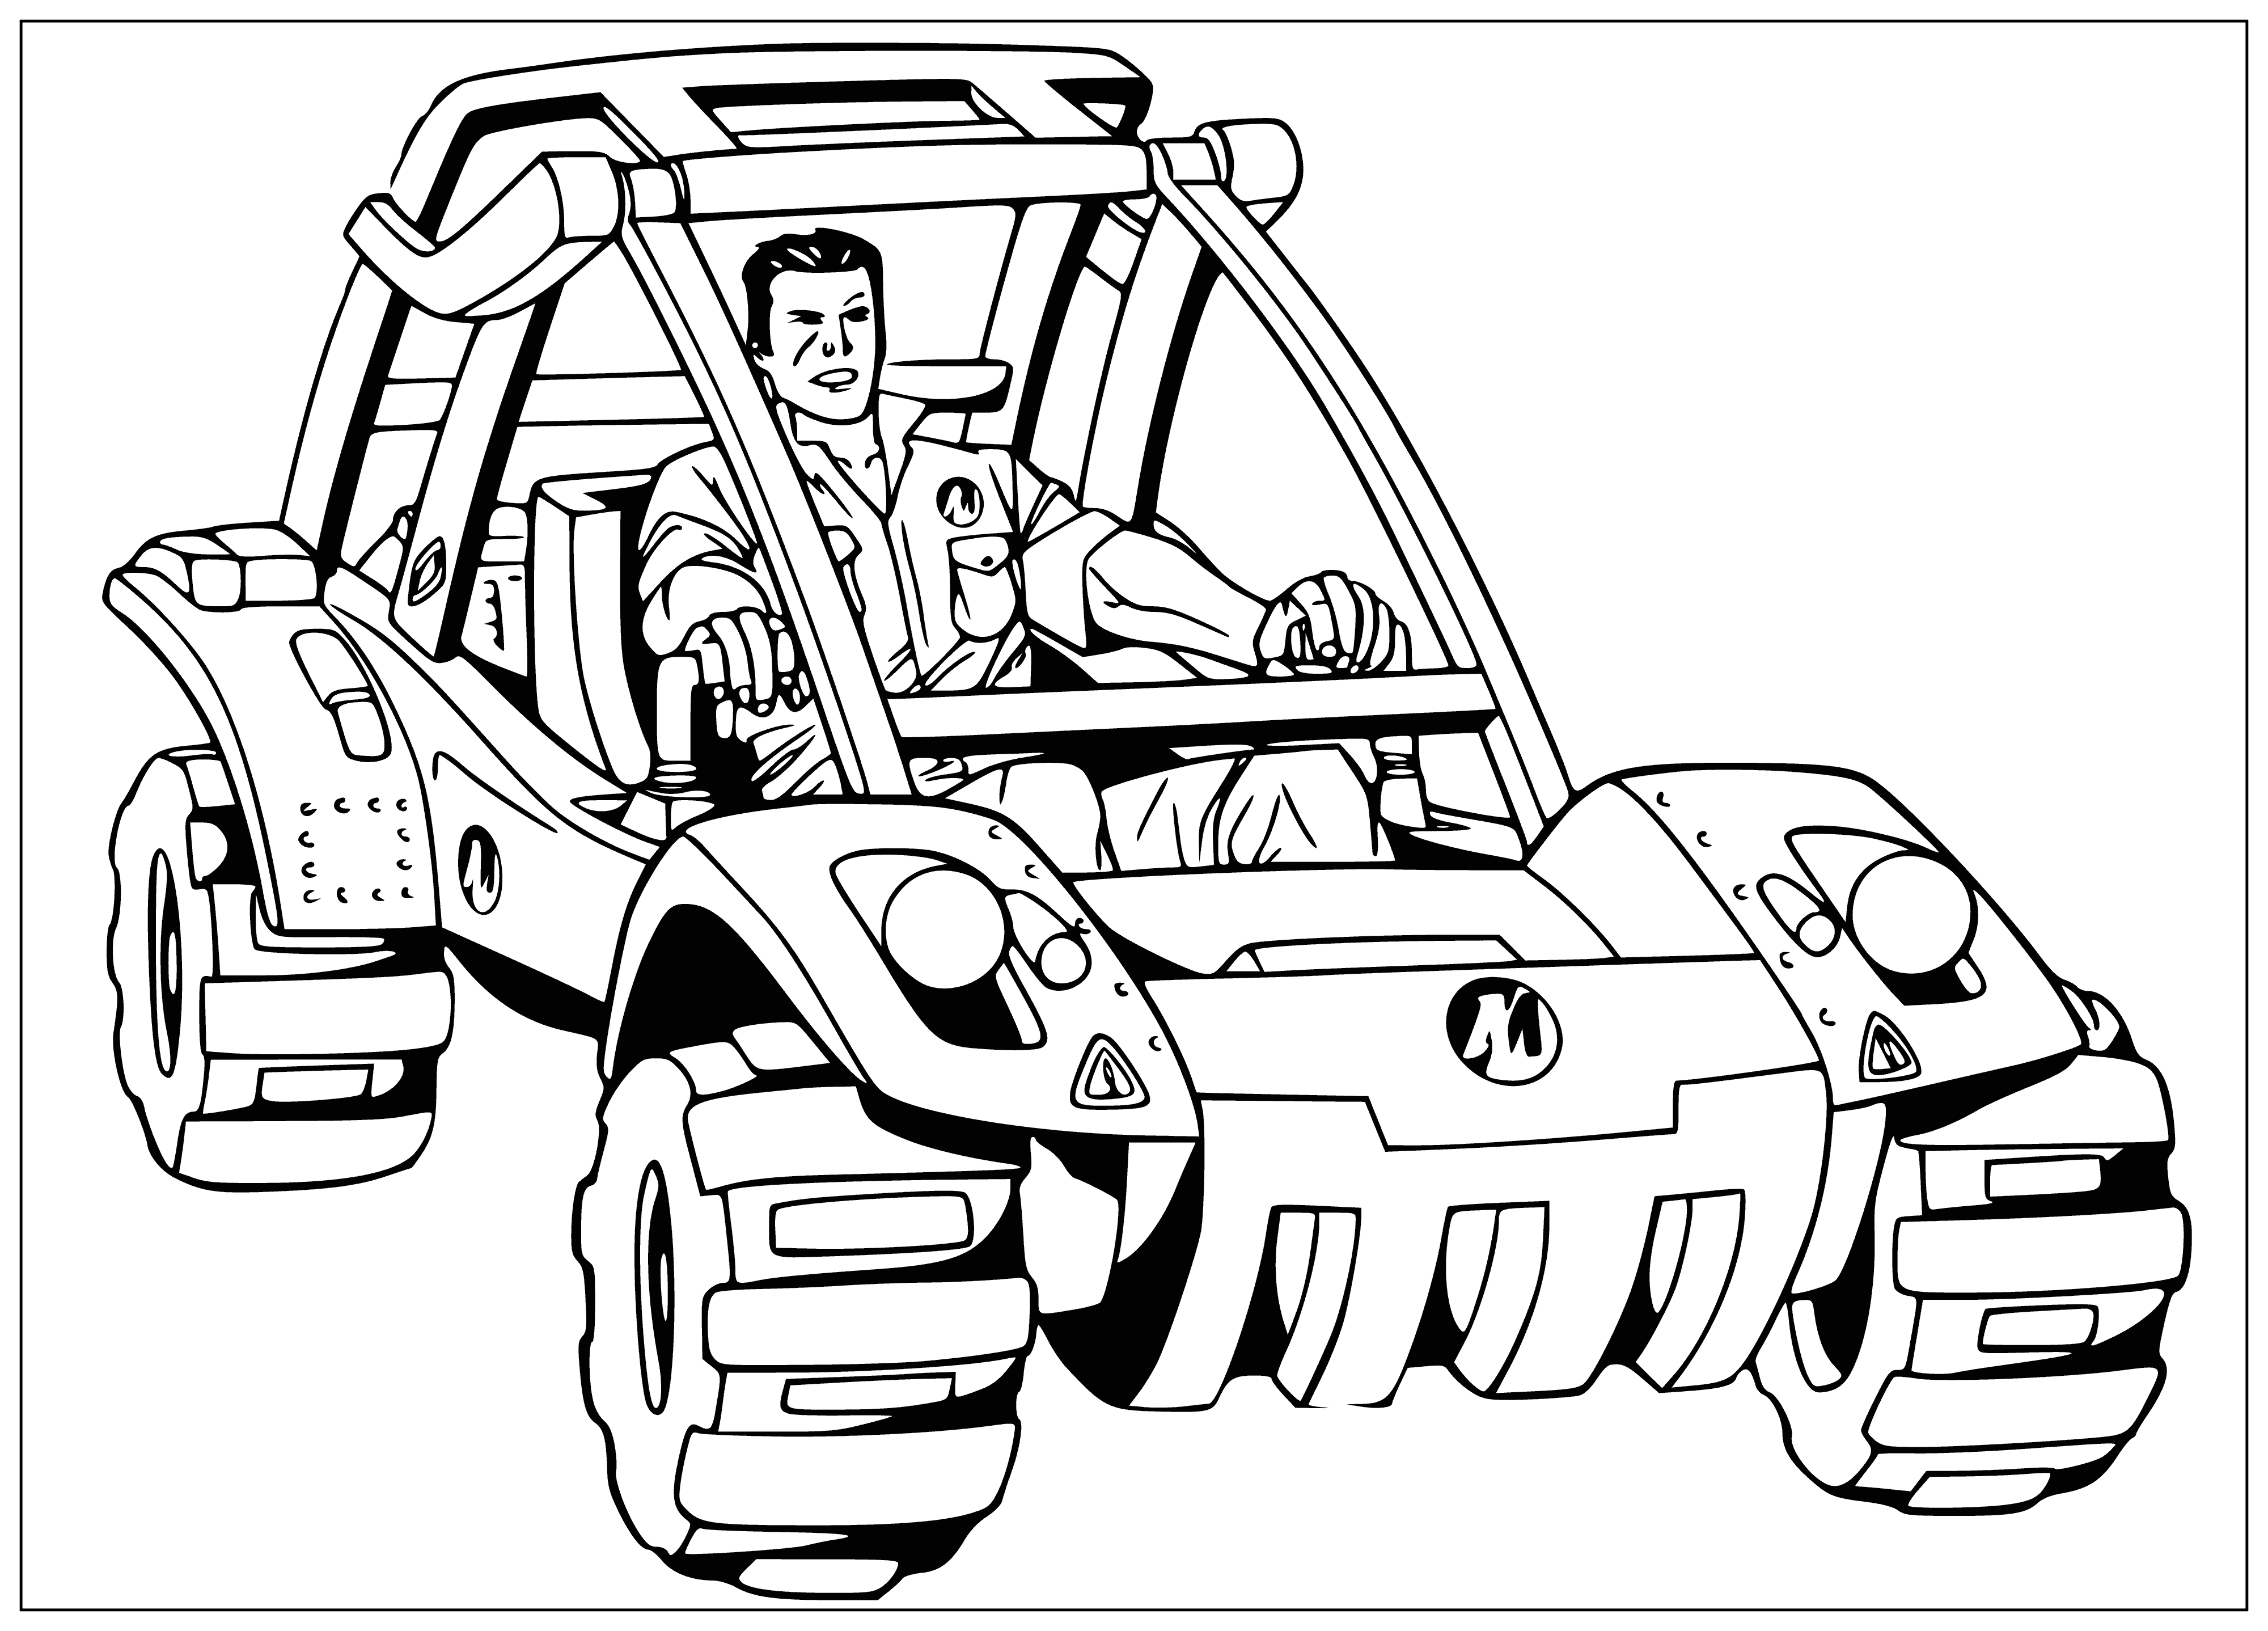 coloring page: ActionMan Buggy: Blue vehicle w/ orange flames, yellow seat & steering wheel, yellow canopy, 4 black tires, 2 yellow lights.